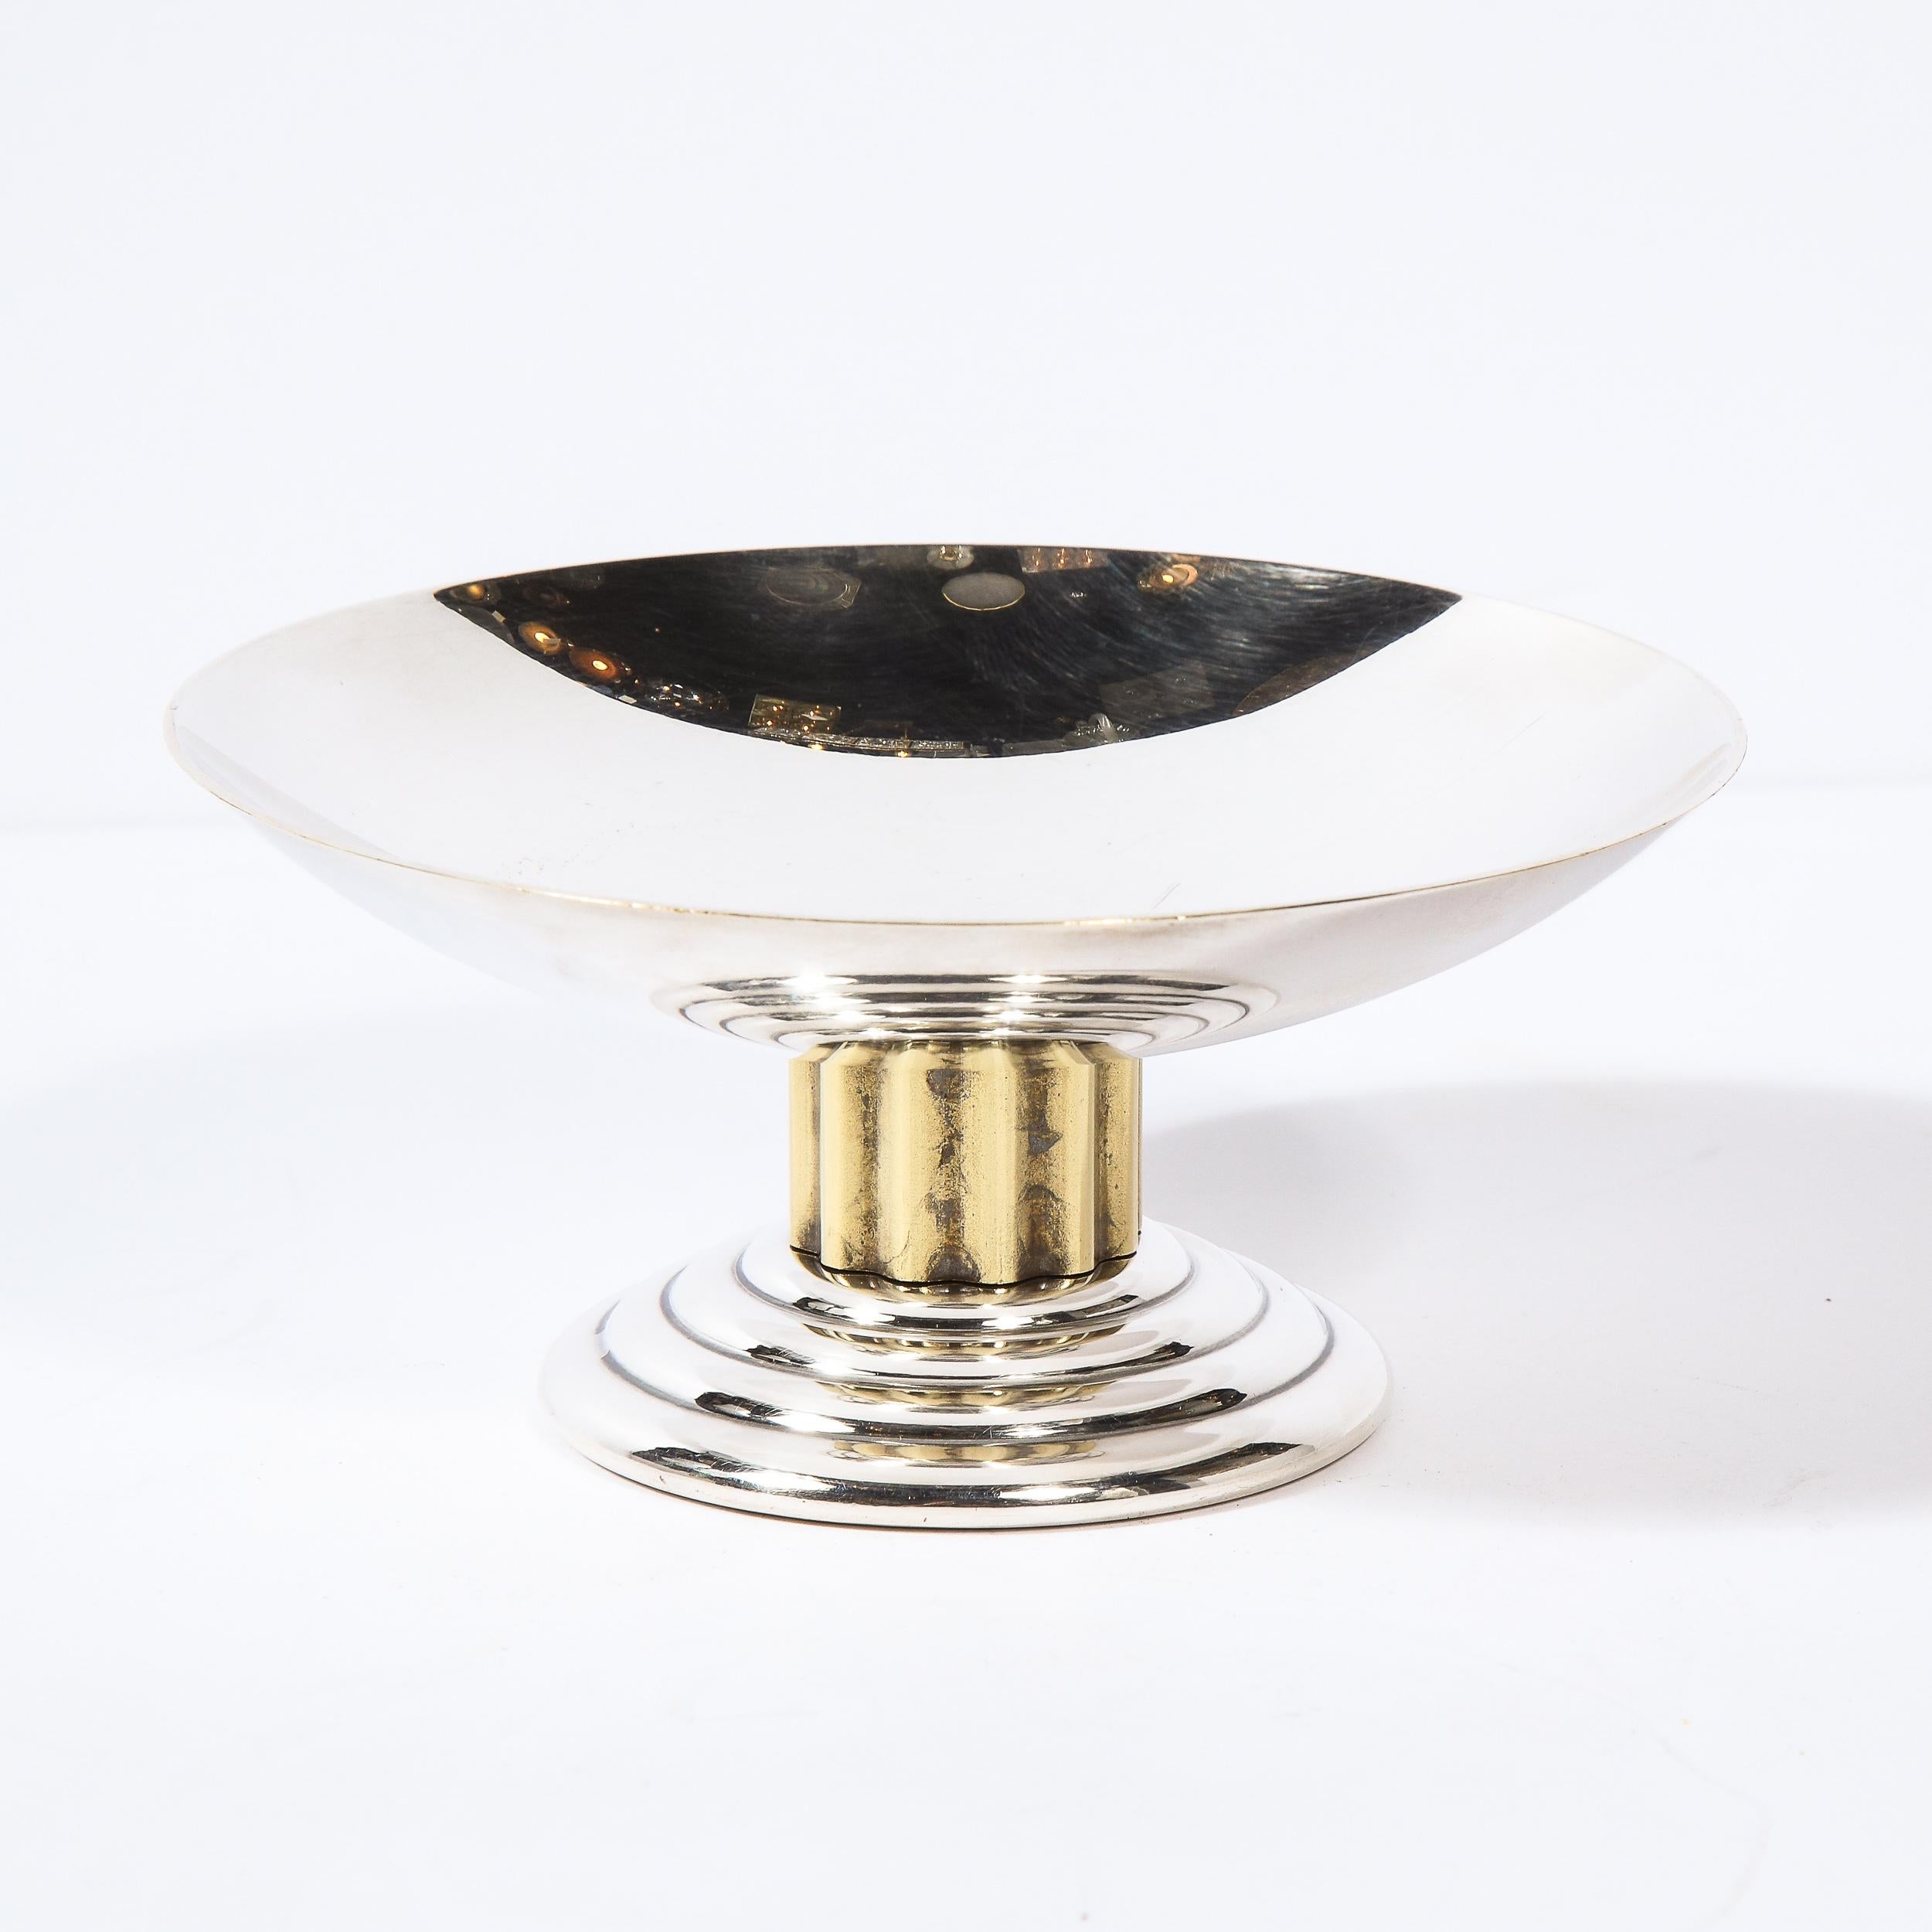 This stunning Art Deco silverplate and gilt dish was realized by Puiforcat in France, circa 1960. It features a tiered skyscraper style base with a channeled gilt stem that ascends into a concave dish- perfect for holding mints, candies, flower